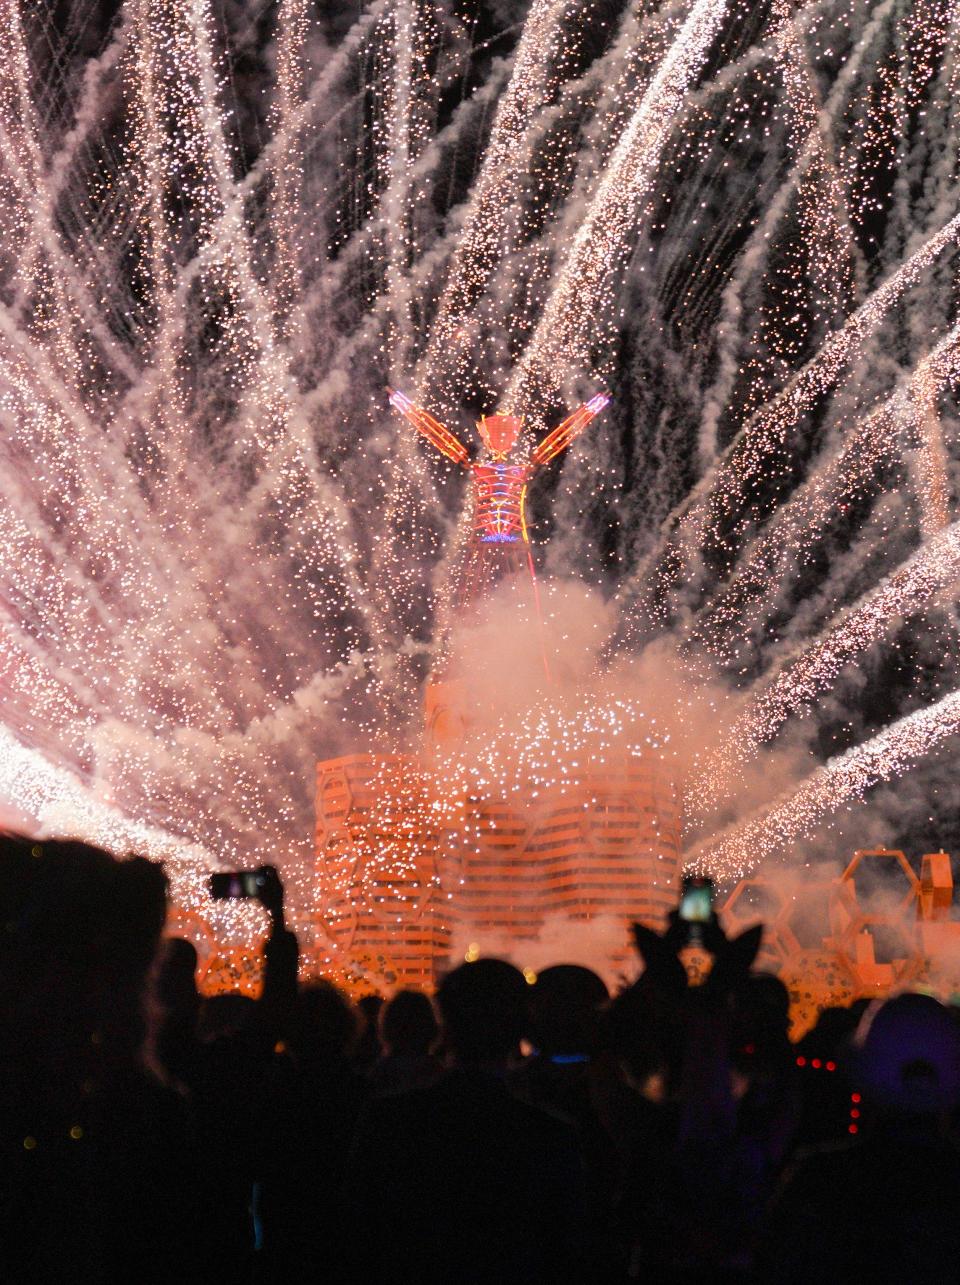 Fireworks explode as part of the Man burn at Burning Man on Labor Day.